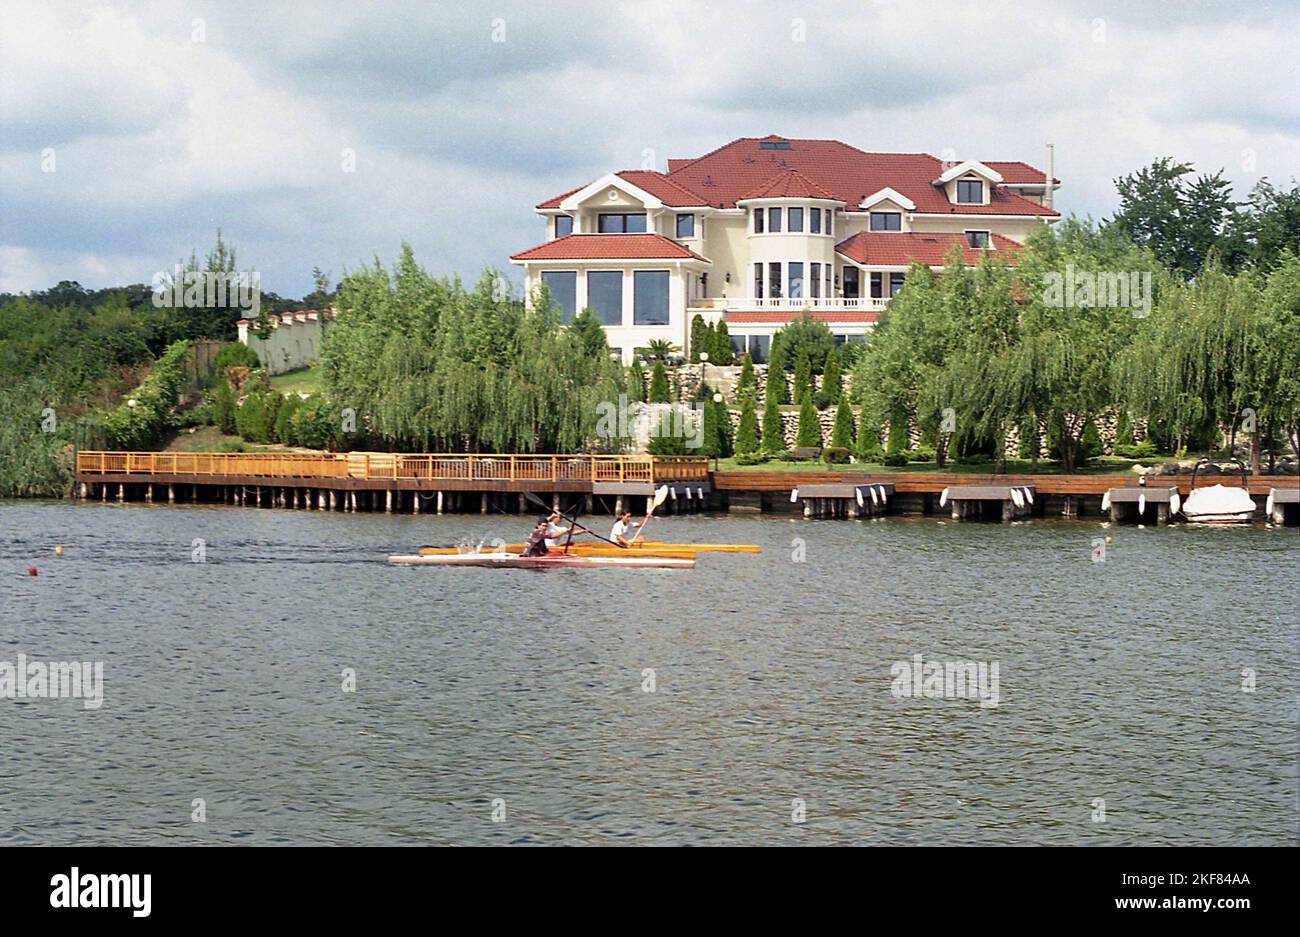 Ilfov County, Romania, approx. 2000. People kayaking on Lake Snagov, passing by a large new residential villa. Stock Photo